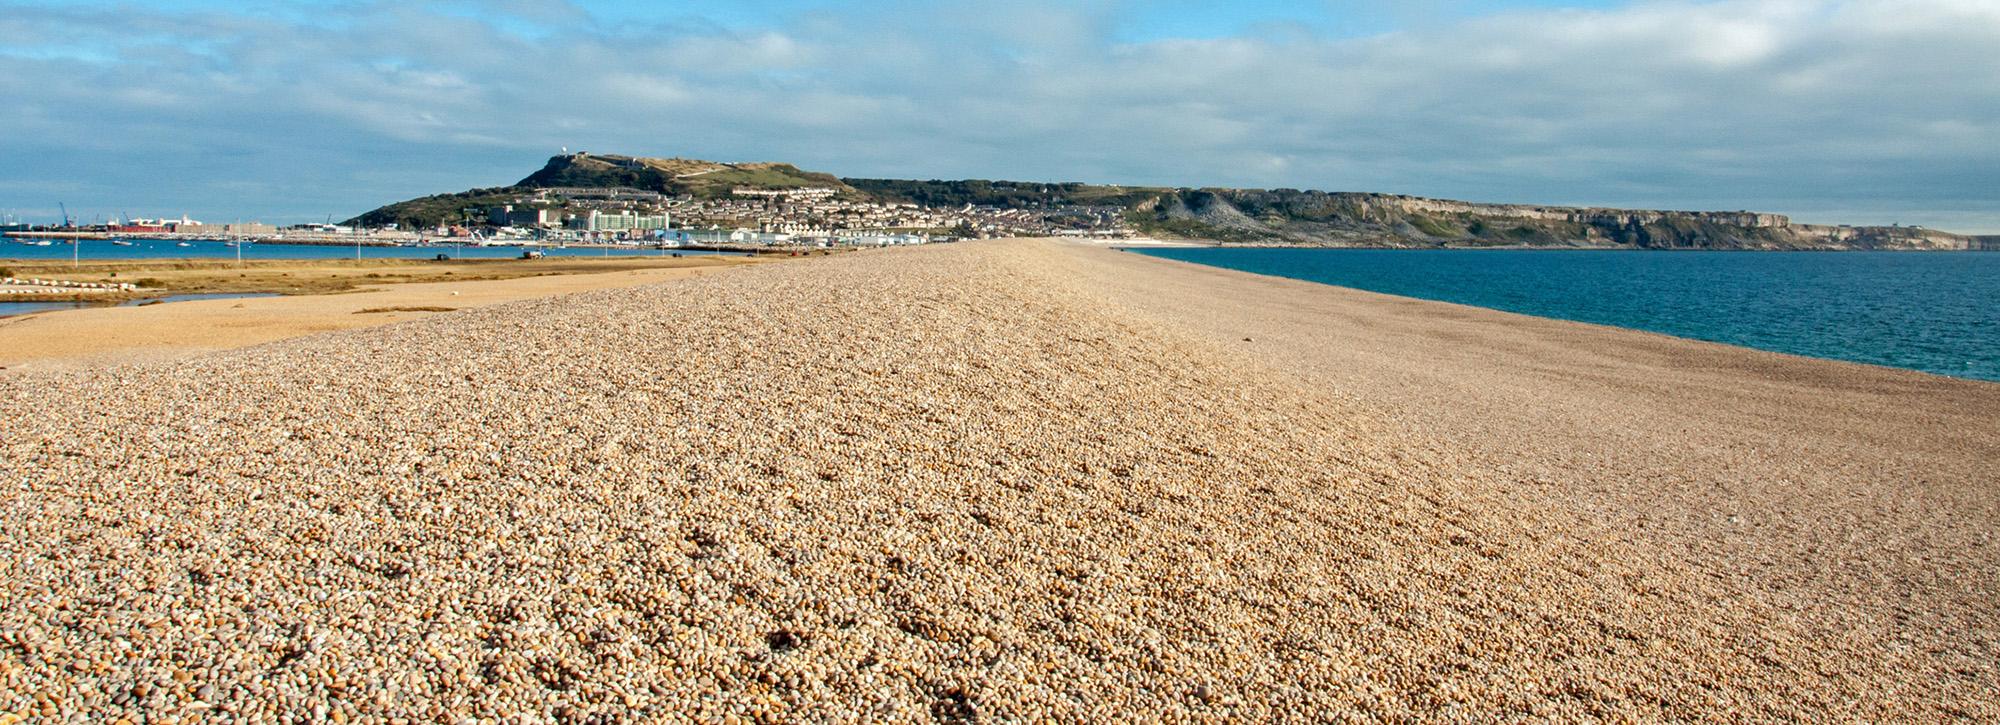 View of Chesil sand beach, UK with houses